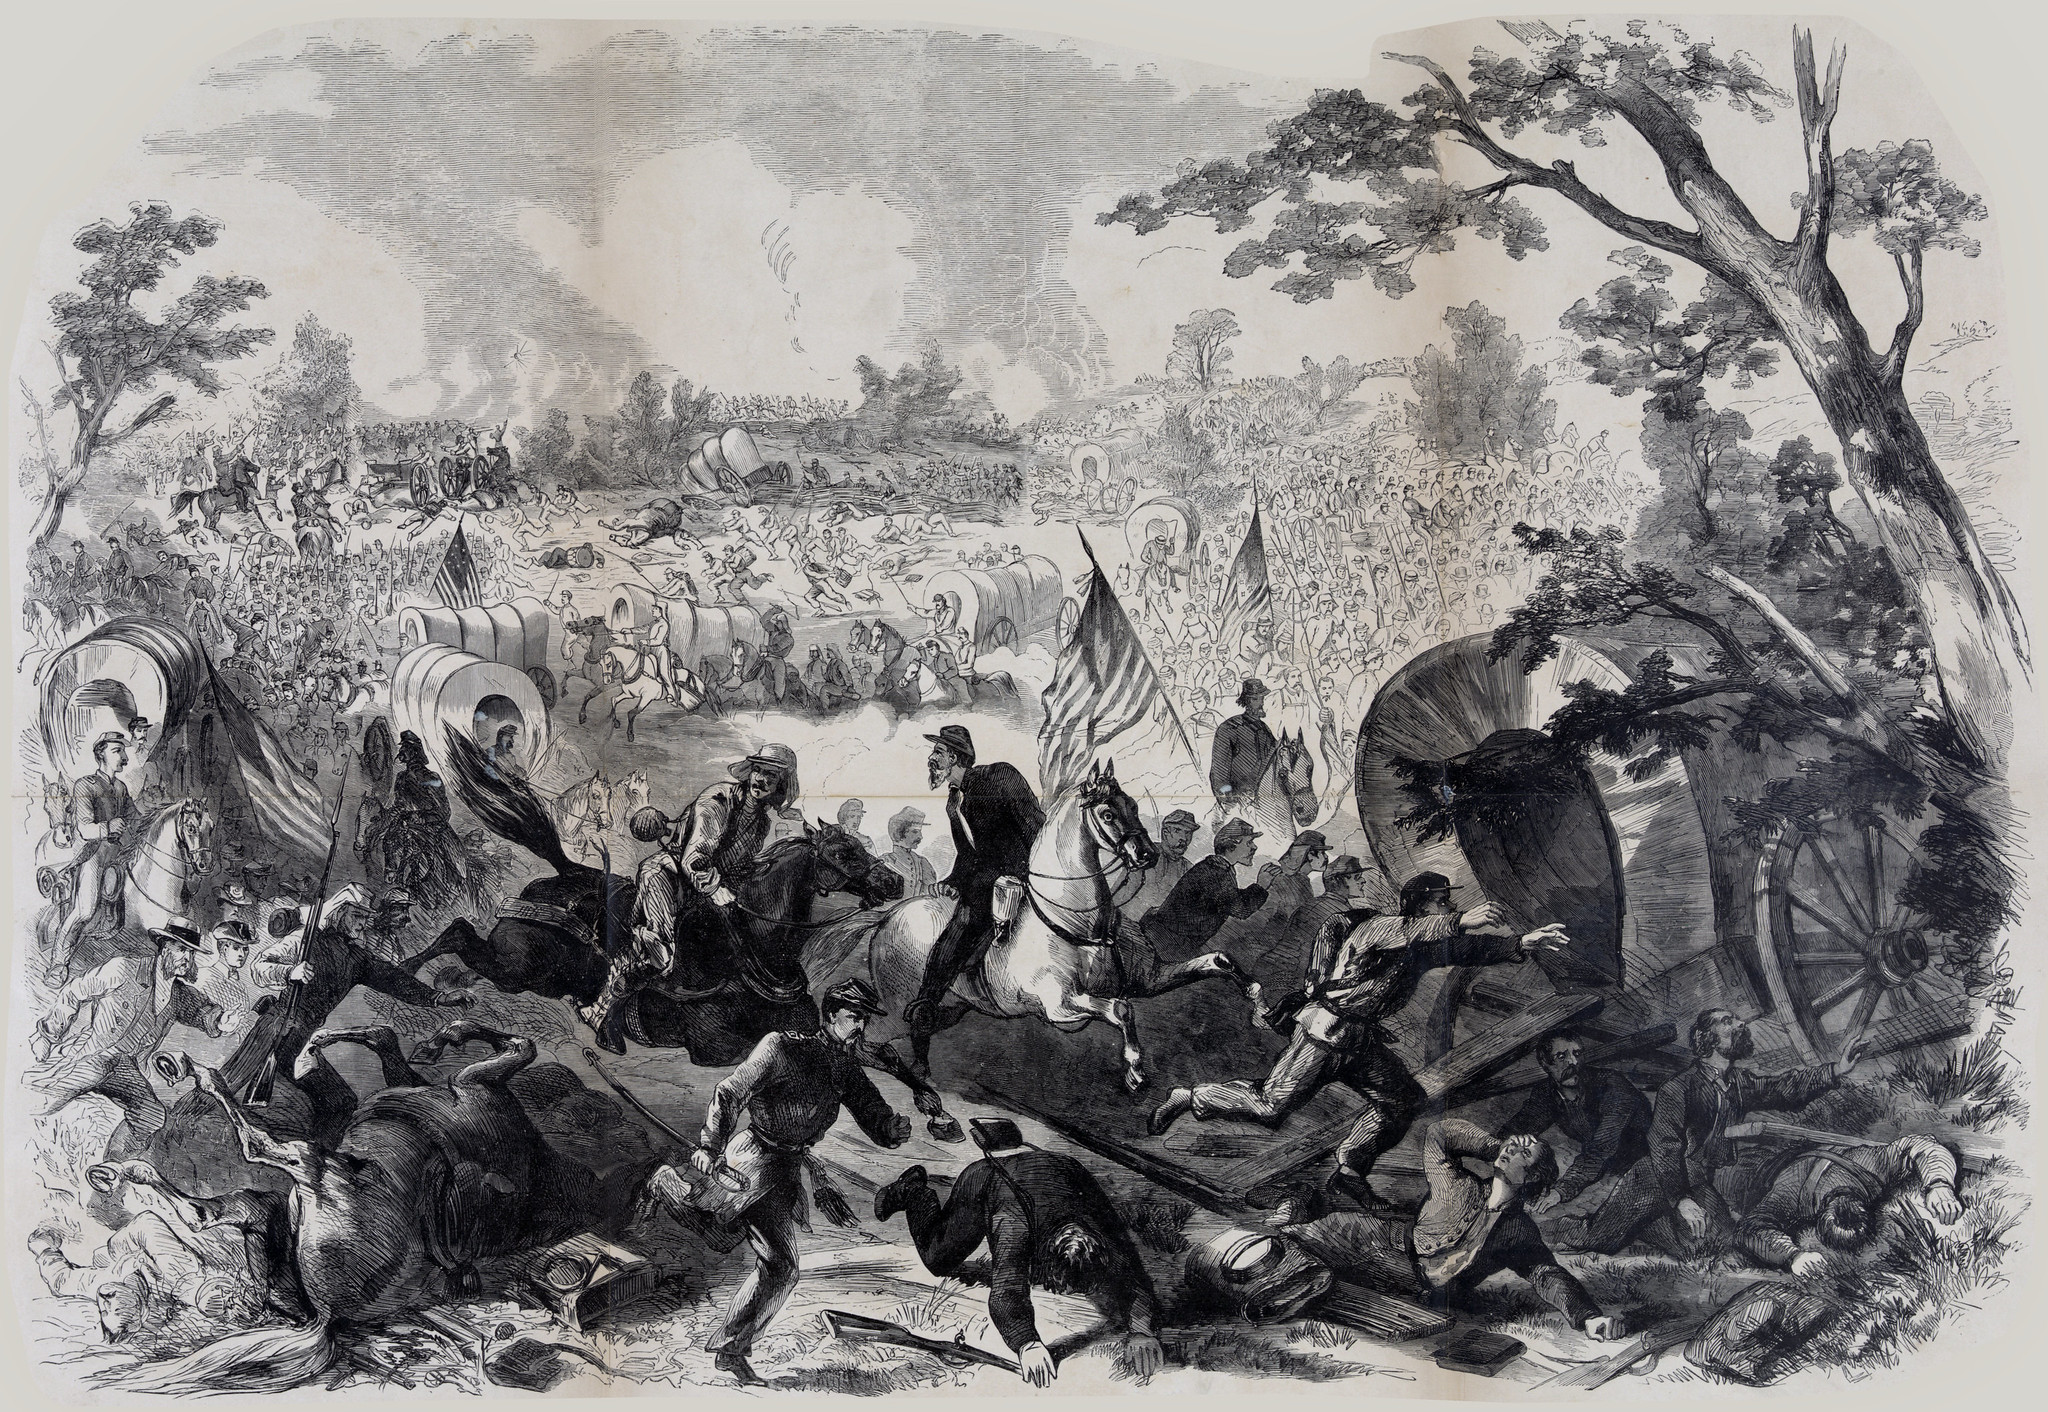 The First Battle of Bull Run, Va., Sunday afternoon, July 21, 1861